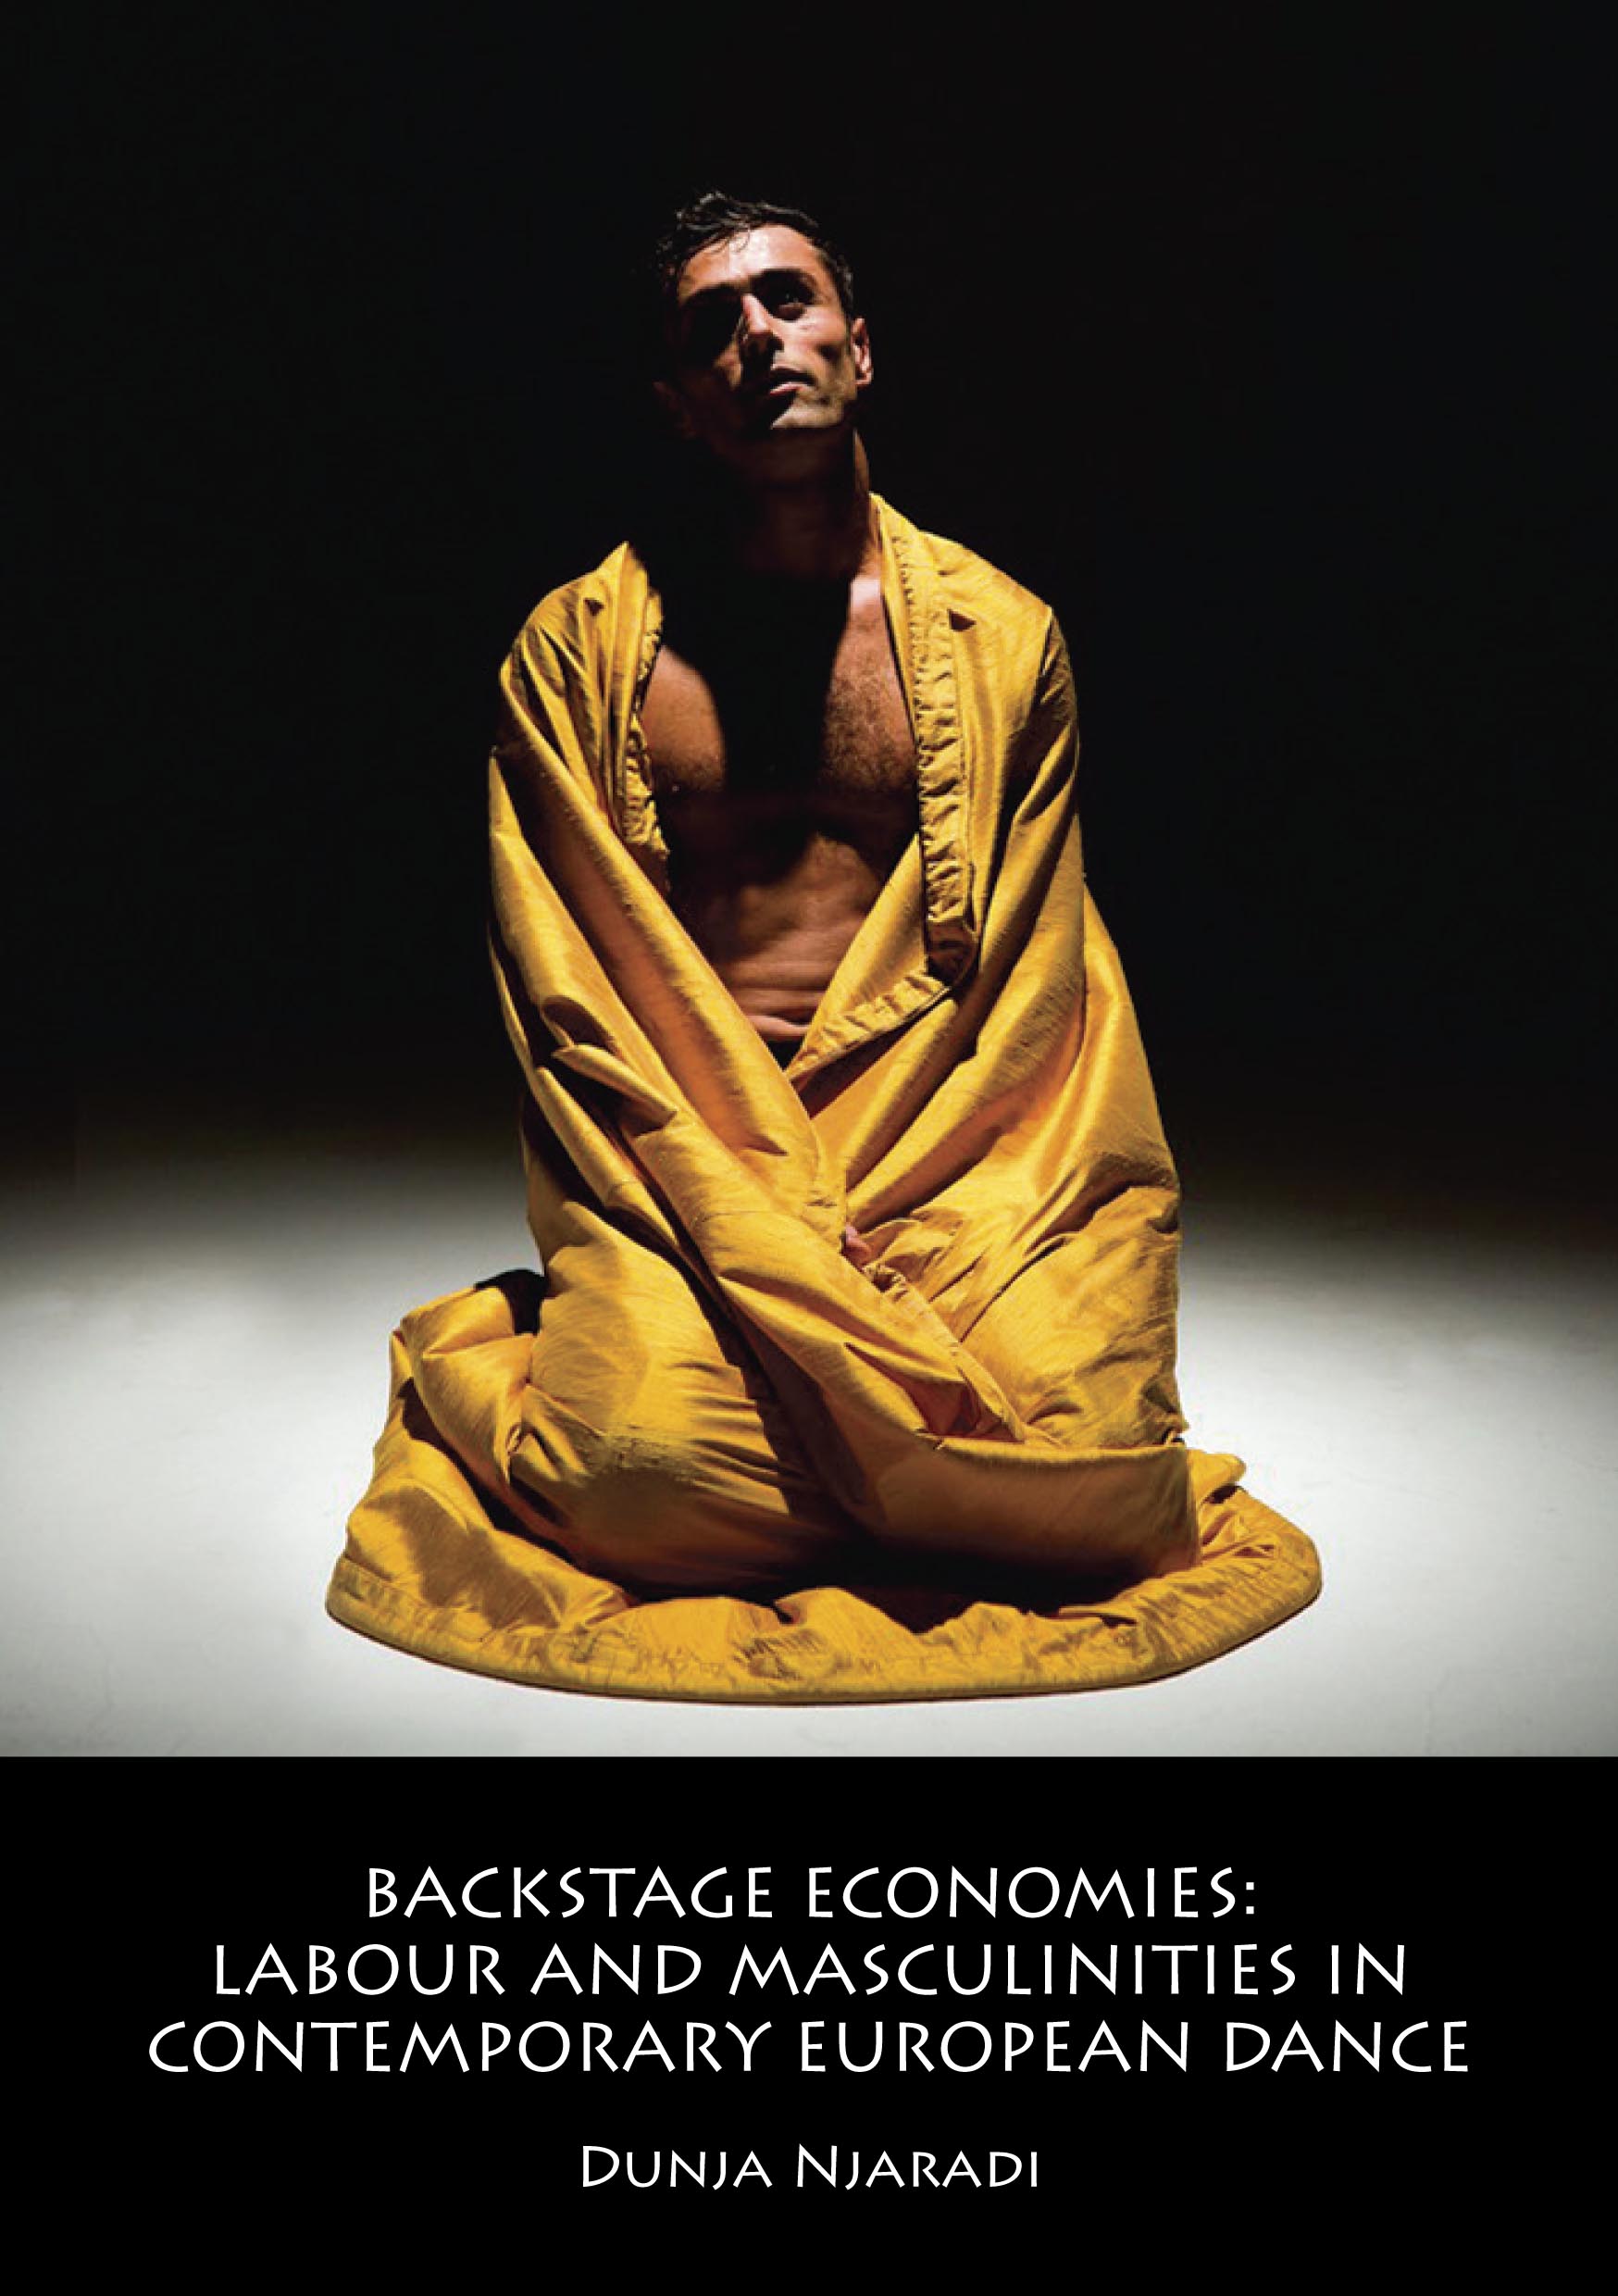 Backstage Economies: Labour and Masculinities in Contemporary European Dance